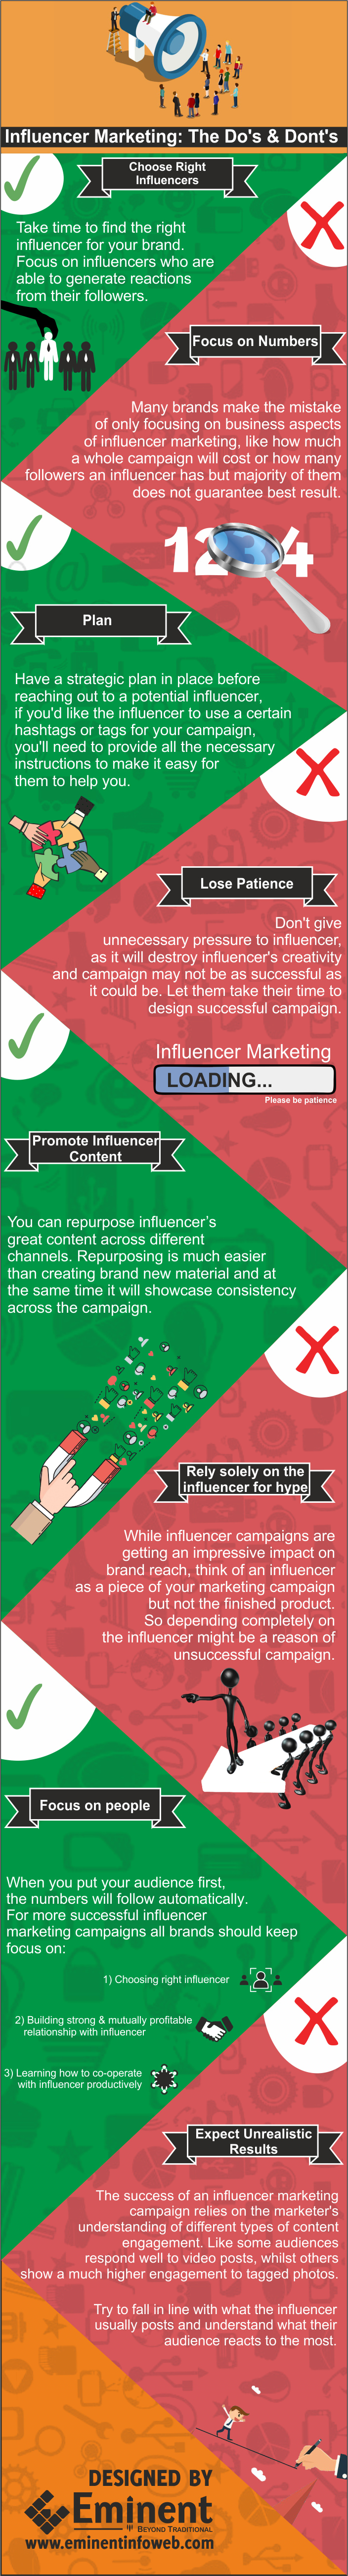 DO’s & Don’ts for Influencer Marketing Infographic